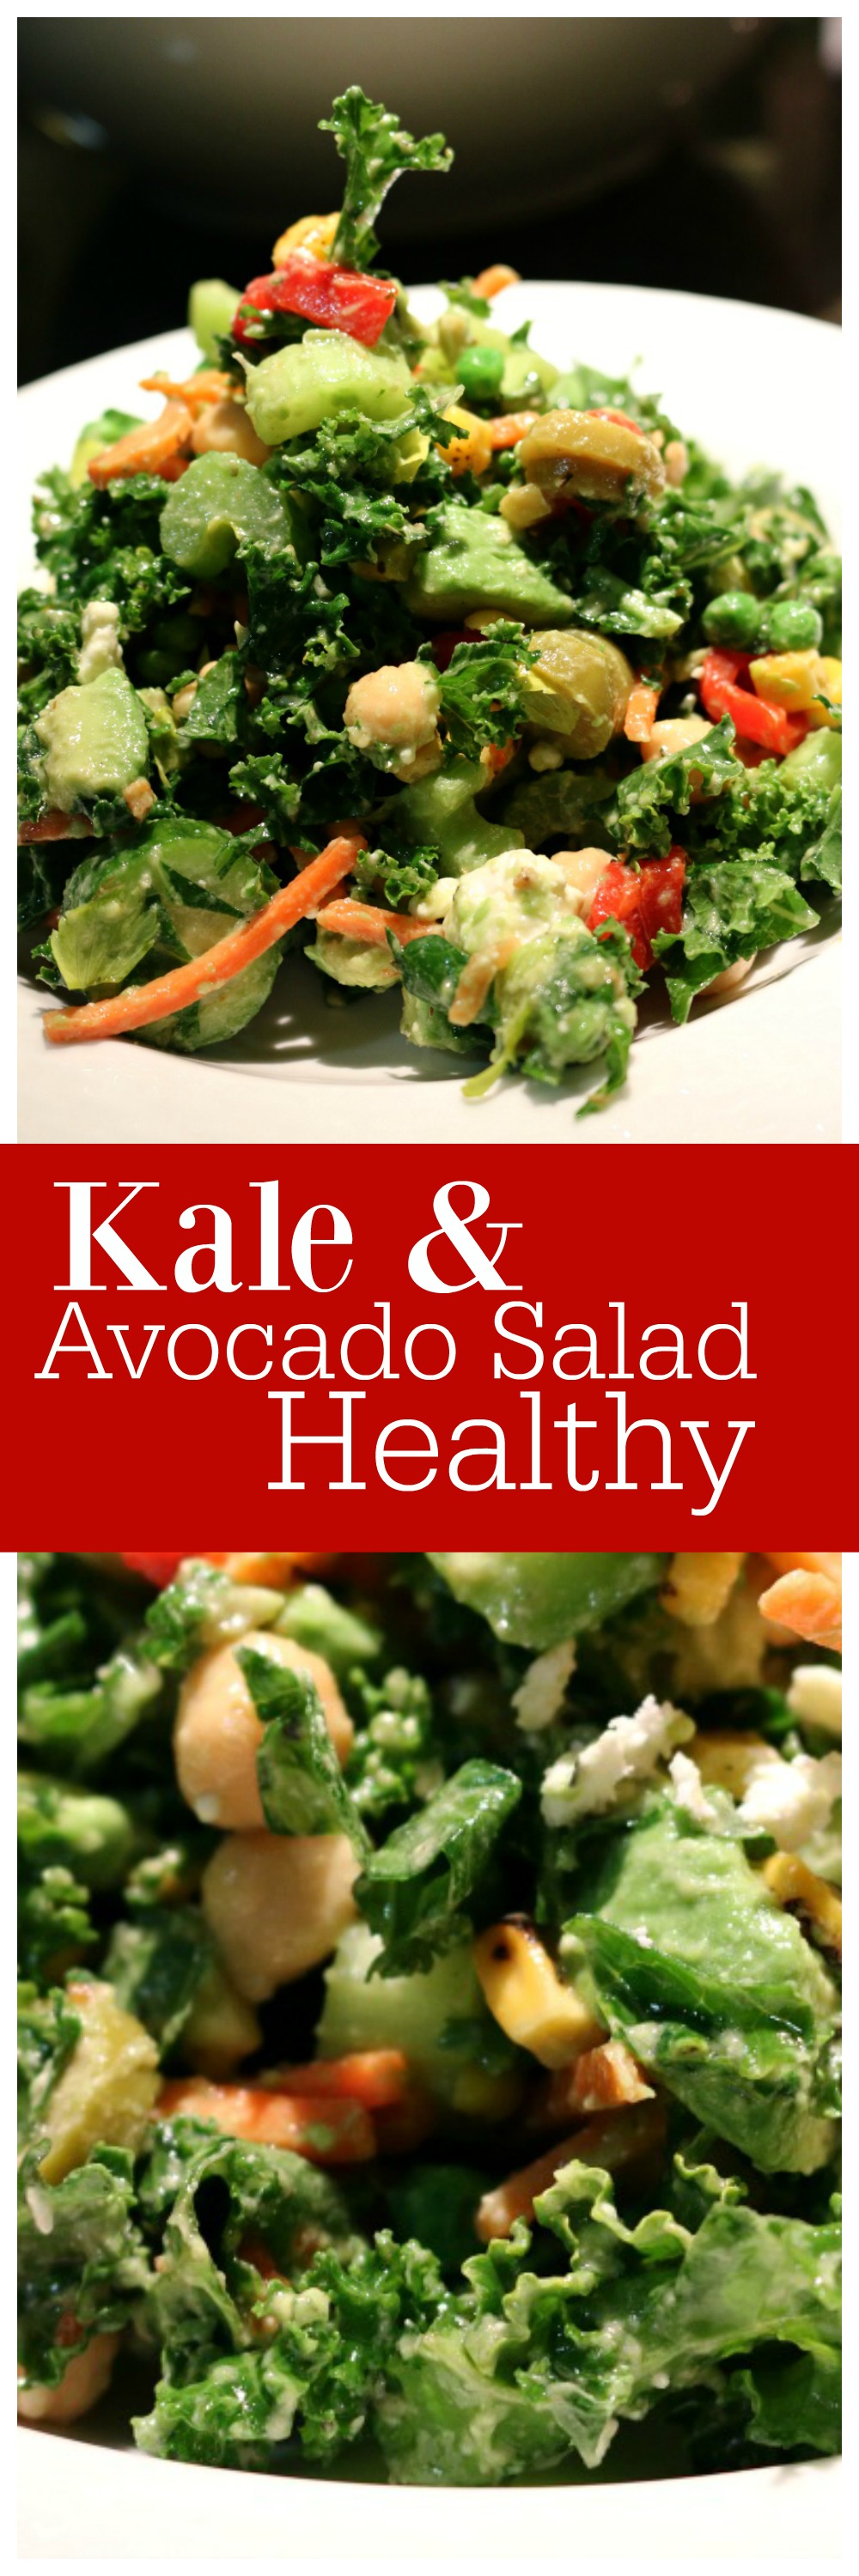 Kale & Avocado Salad Healthy Meal Ideas - Eating Clean and GREEN | www.ceceliasgoodstuff.com